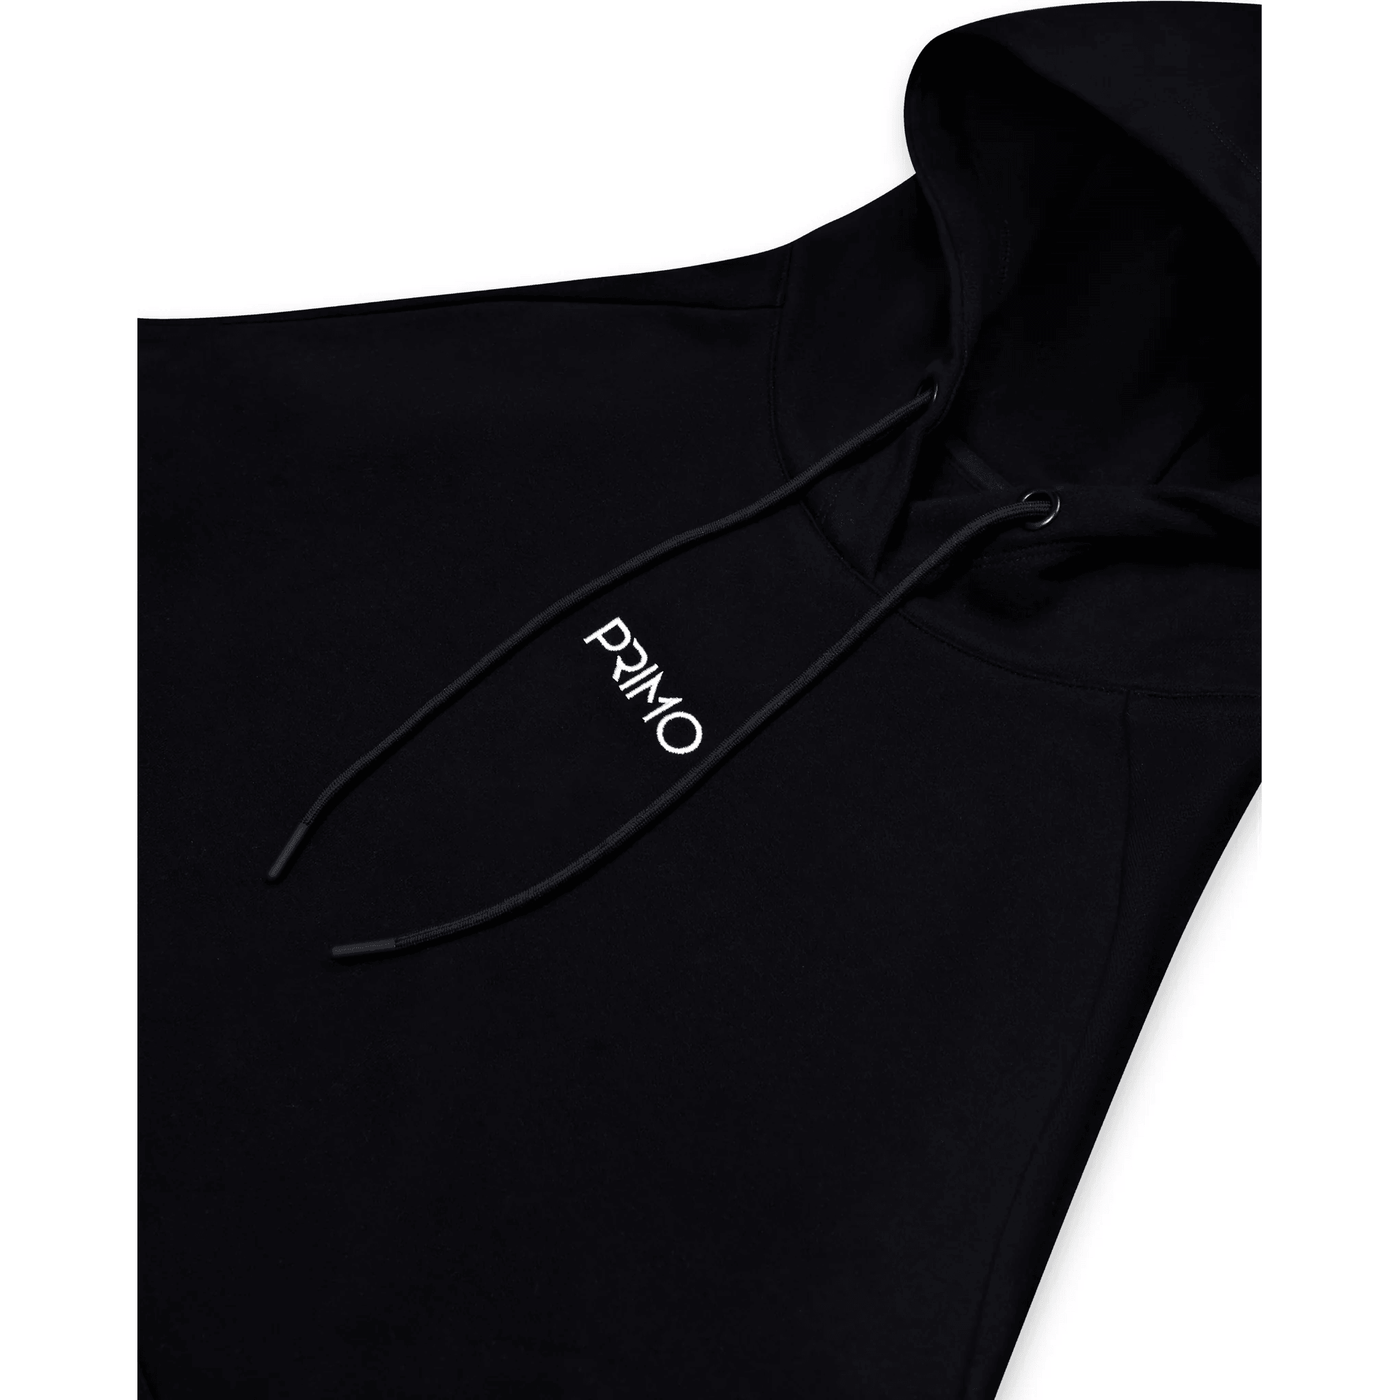 Primo Day One Hoodie - Black - Muay Thailand